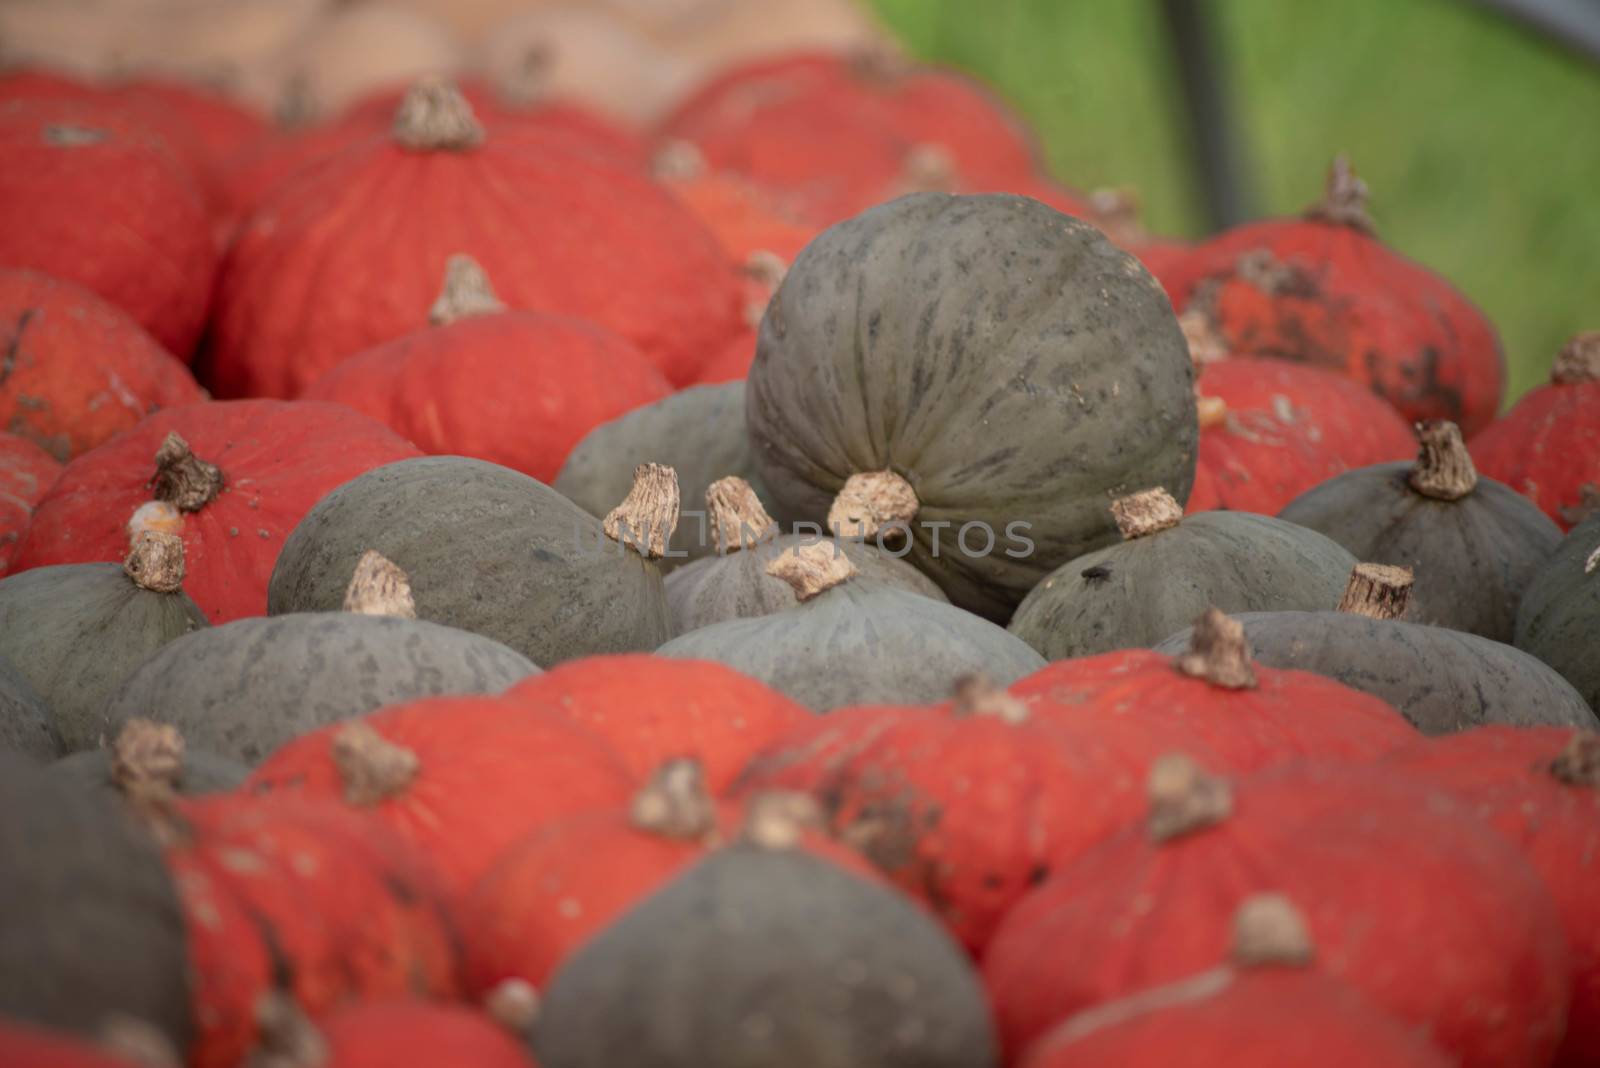 Fresh in from the field orange and green pumpkins are ready for market. Full frame, selective focus, shot in natural light with copy space